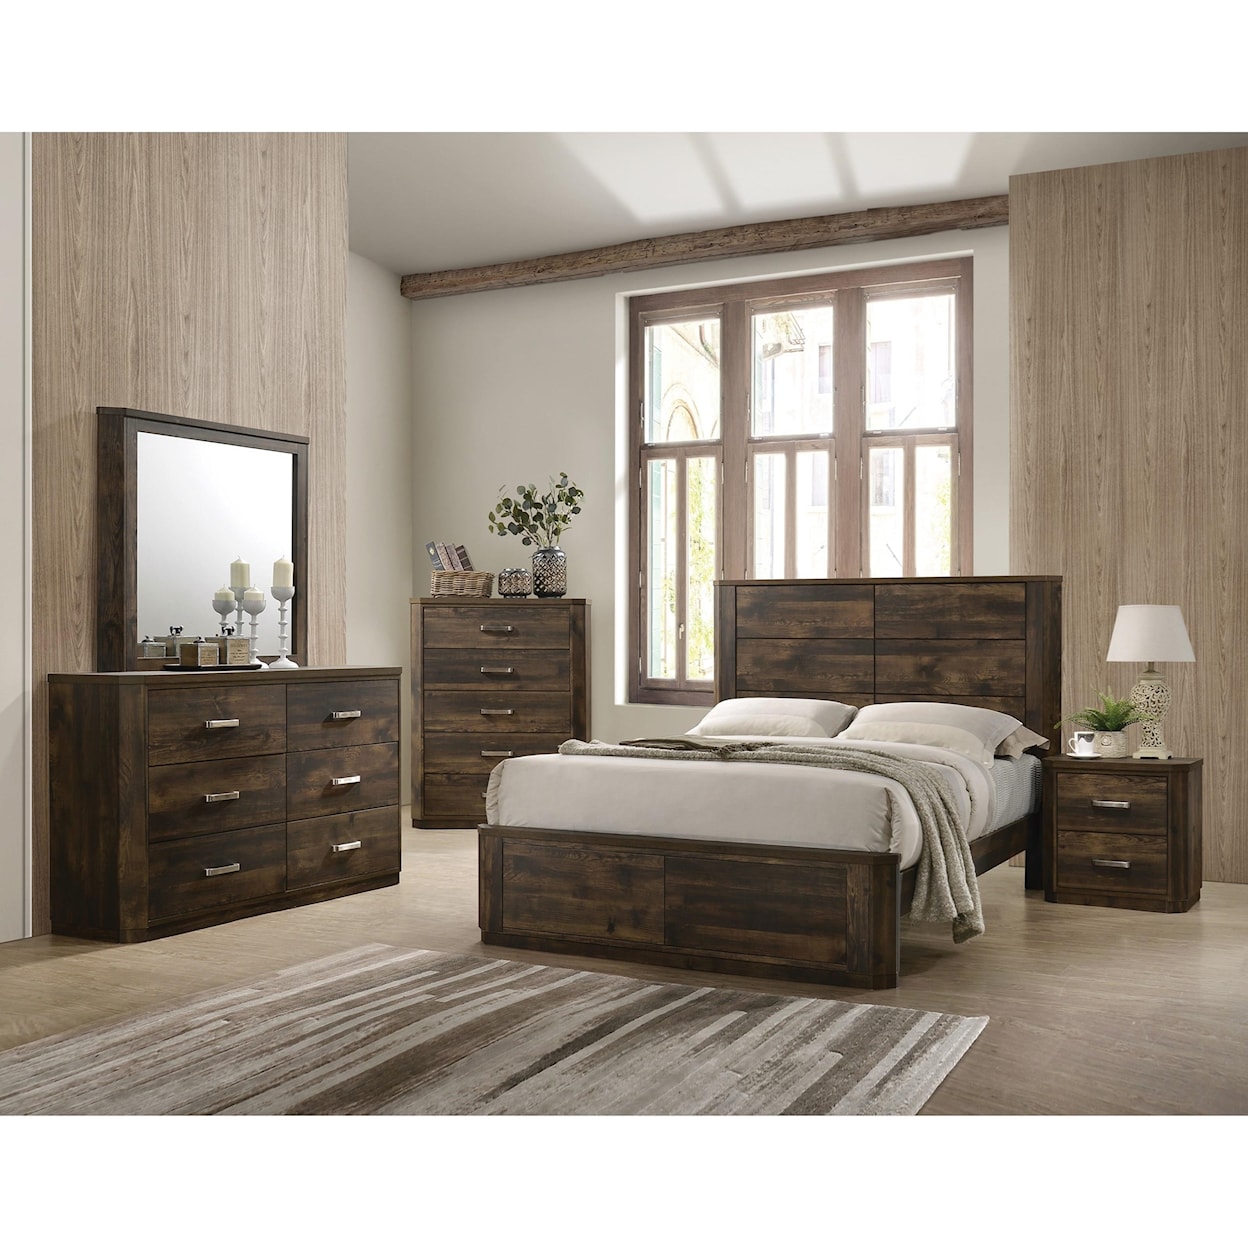 Acme Furniture Elettra King Low Profile Bed